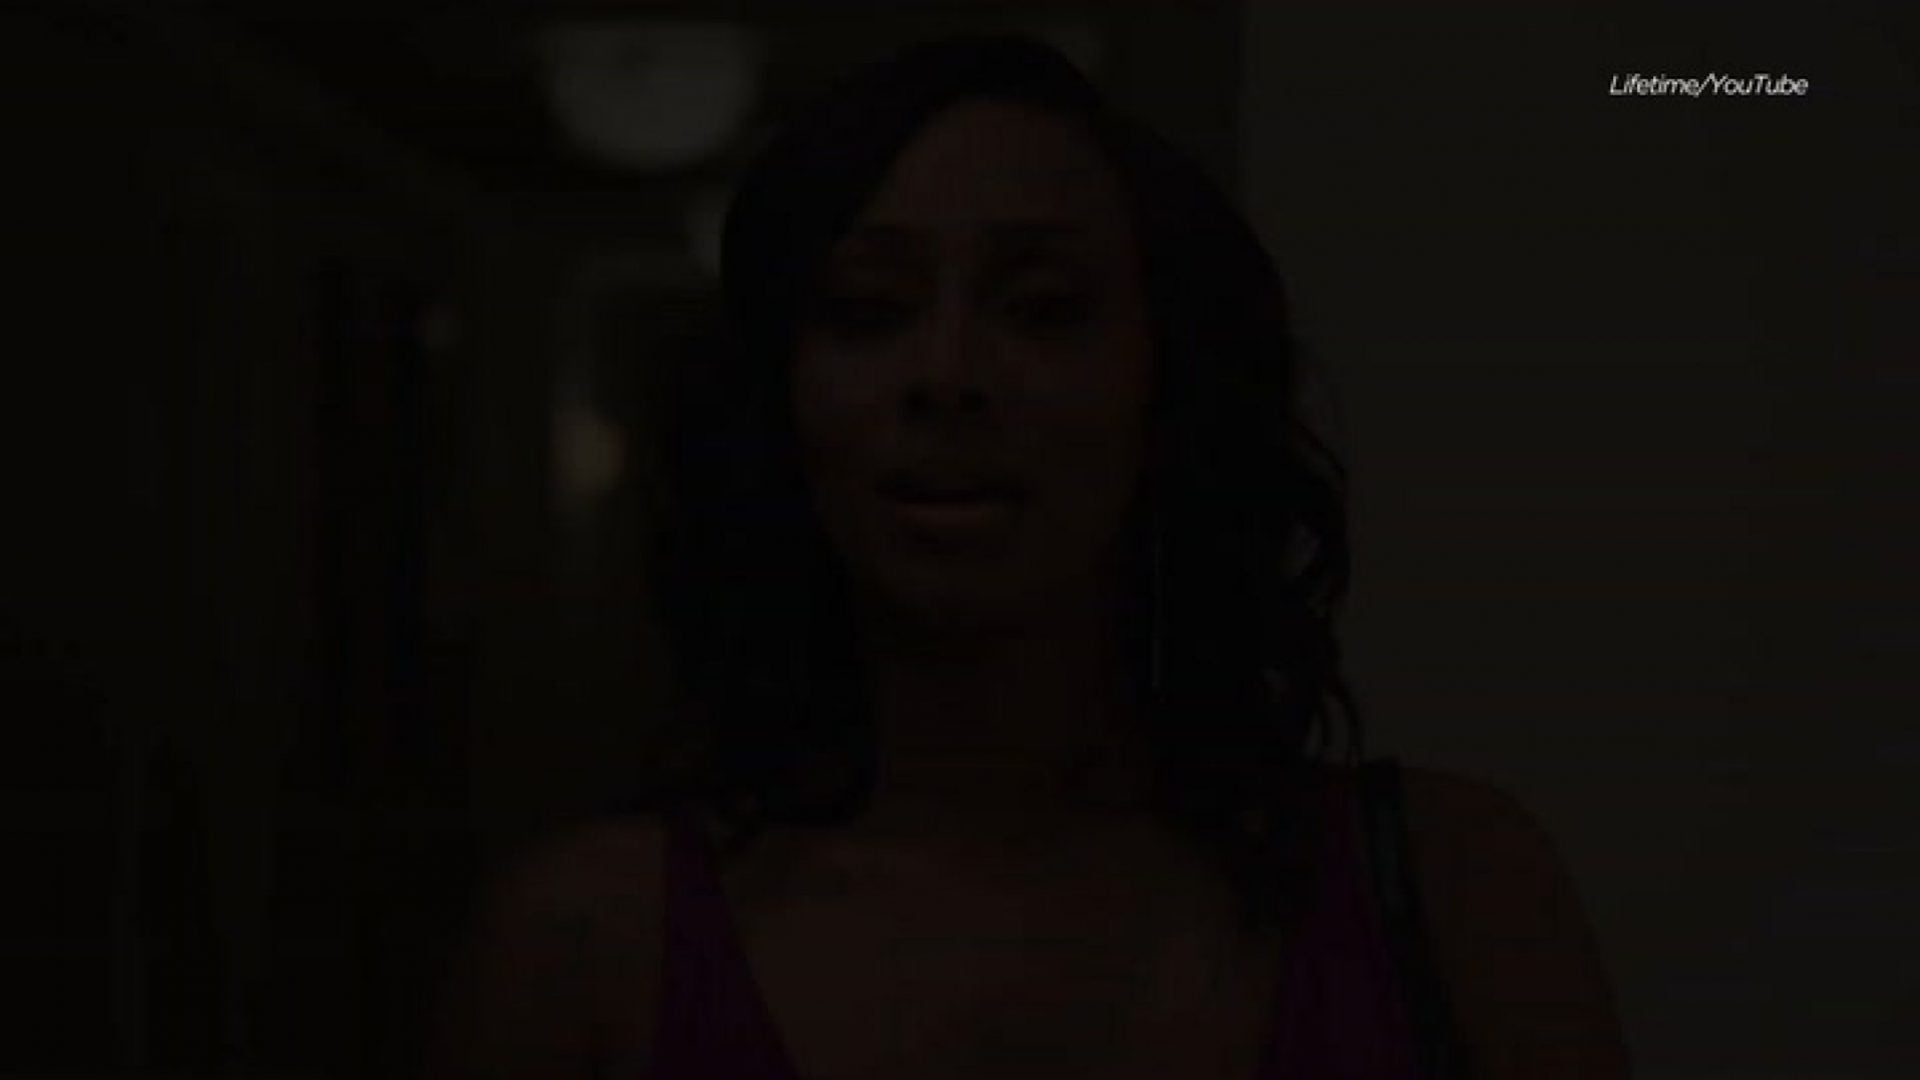 Keri Hilson on Her New Role in Lifetime’s ‘Lust’